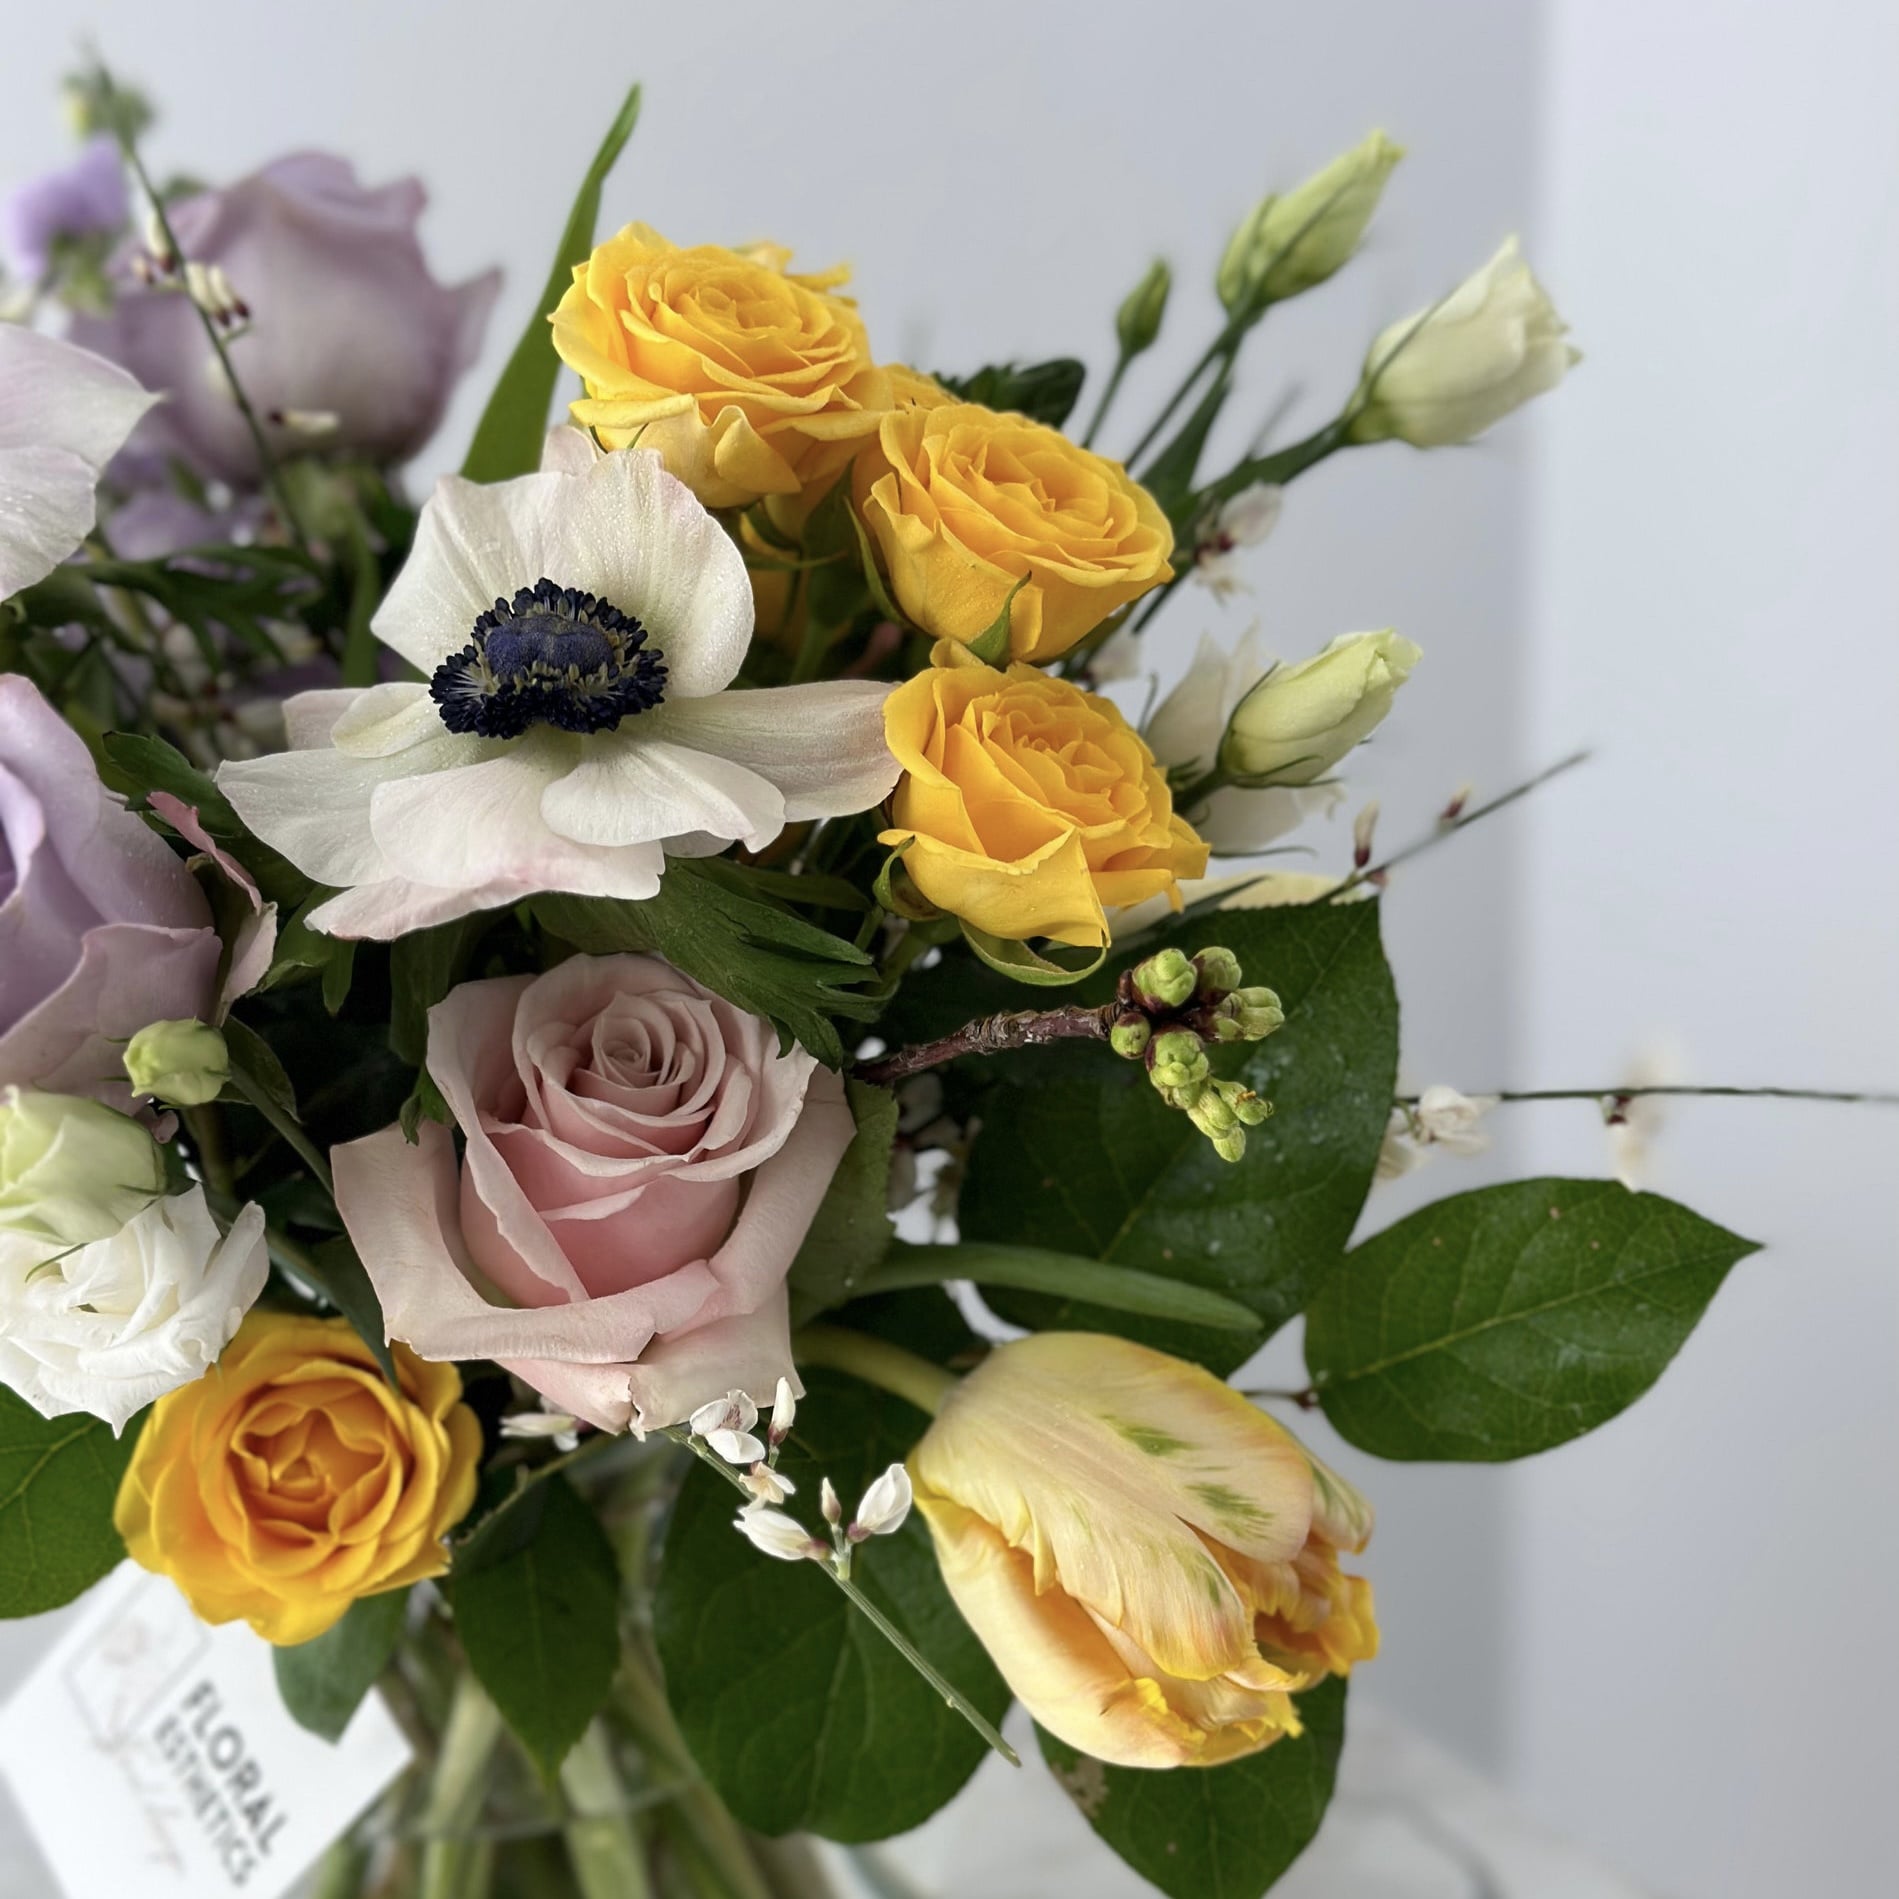 Close-up on Spring flower arrangement in clear vase featuring white anemones, purple roses, yellow spray roses, yellow parrot tulips, genistra, freesia and more